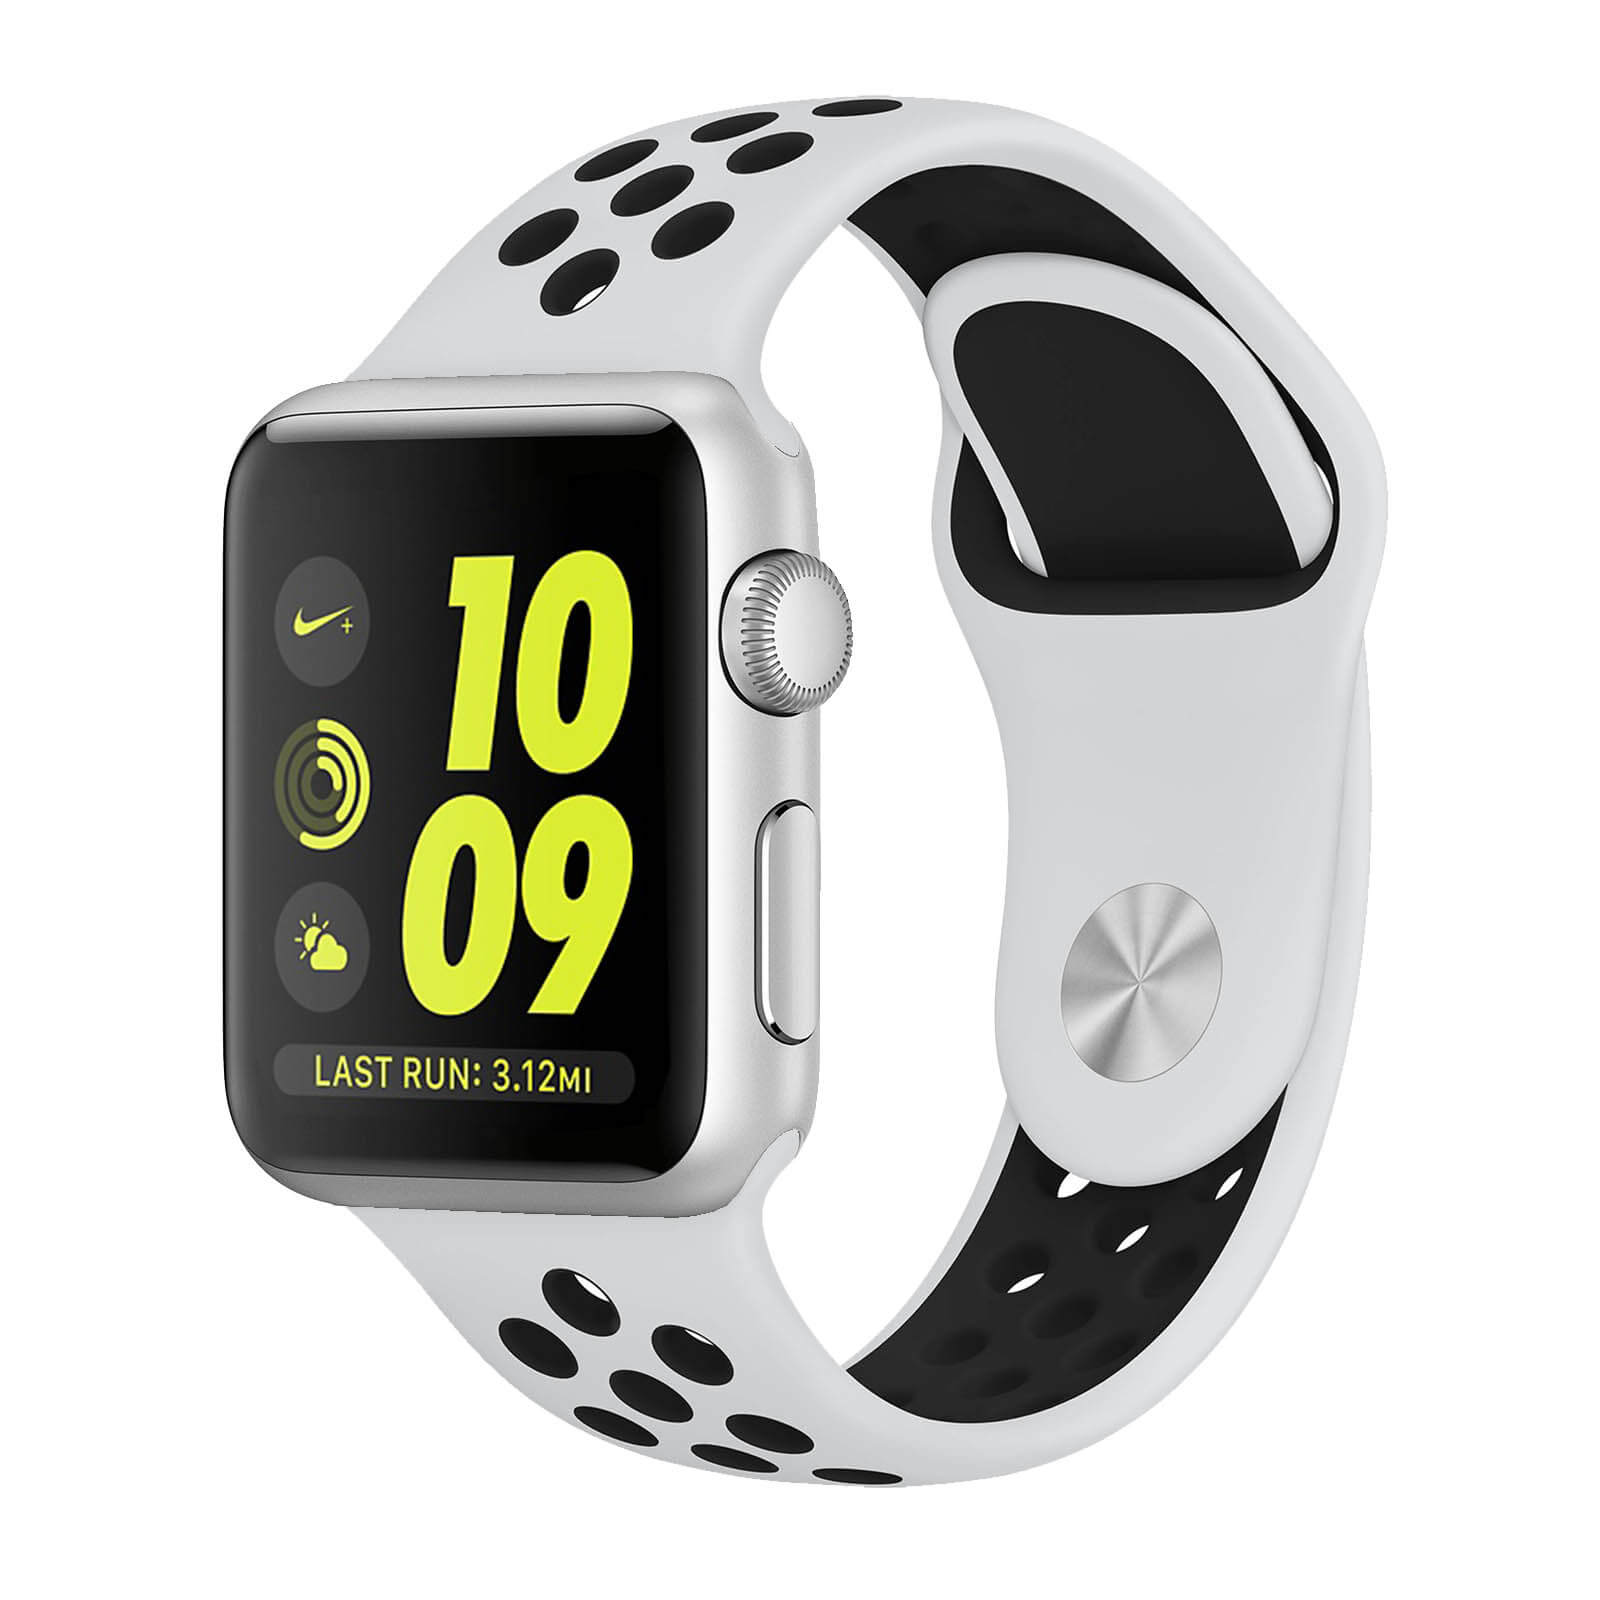 Apple Watch Series 2 Nike 42mm - Argent - Comme Neuf